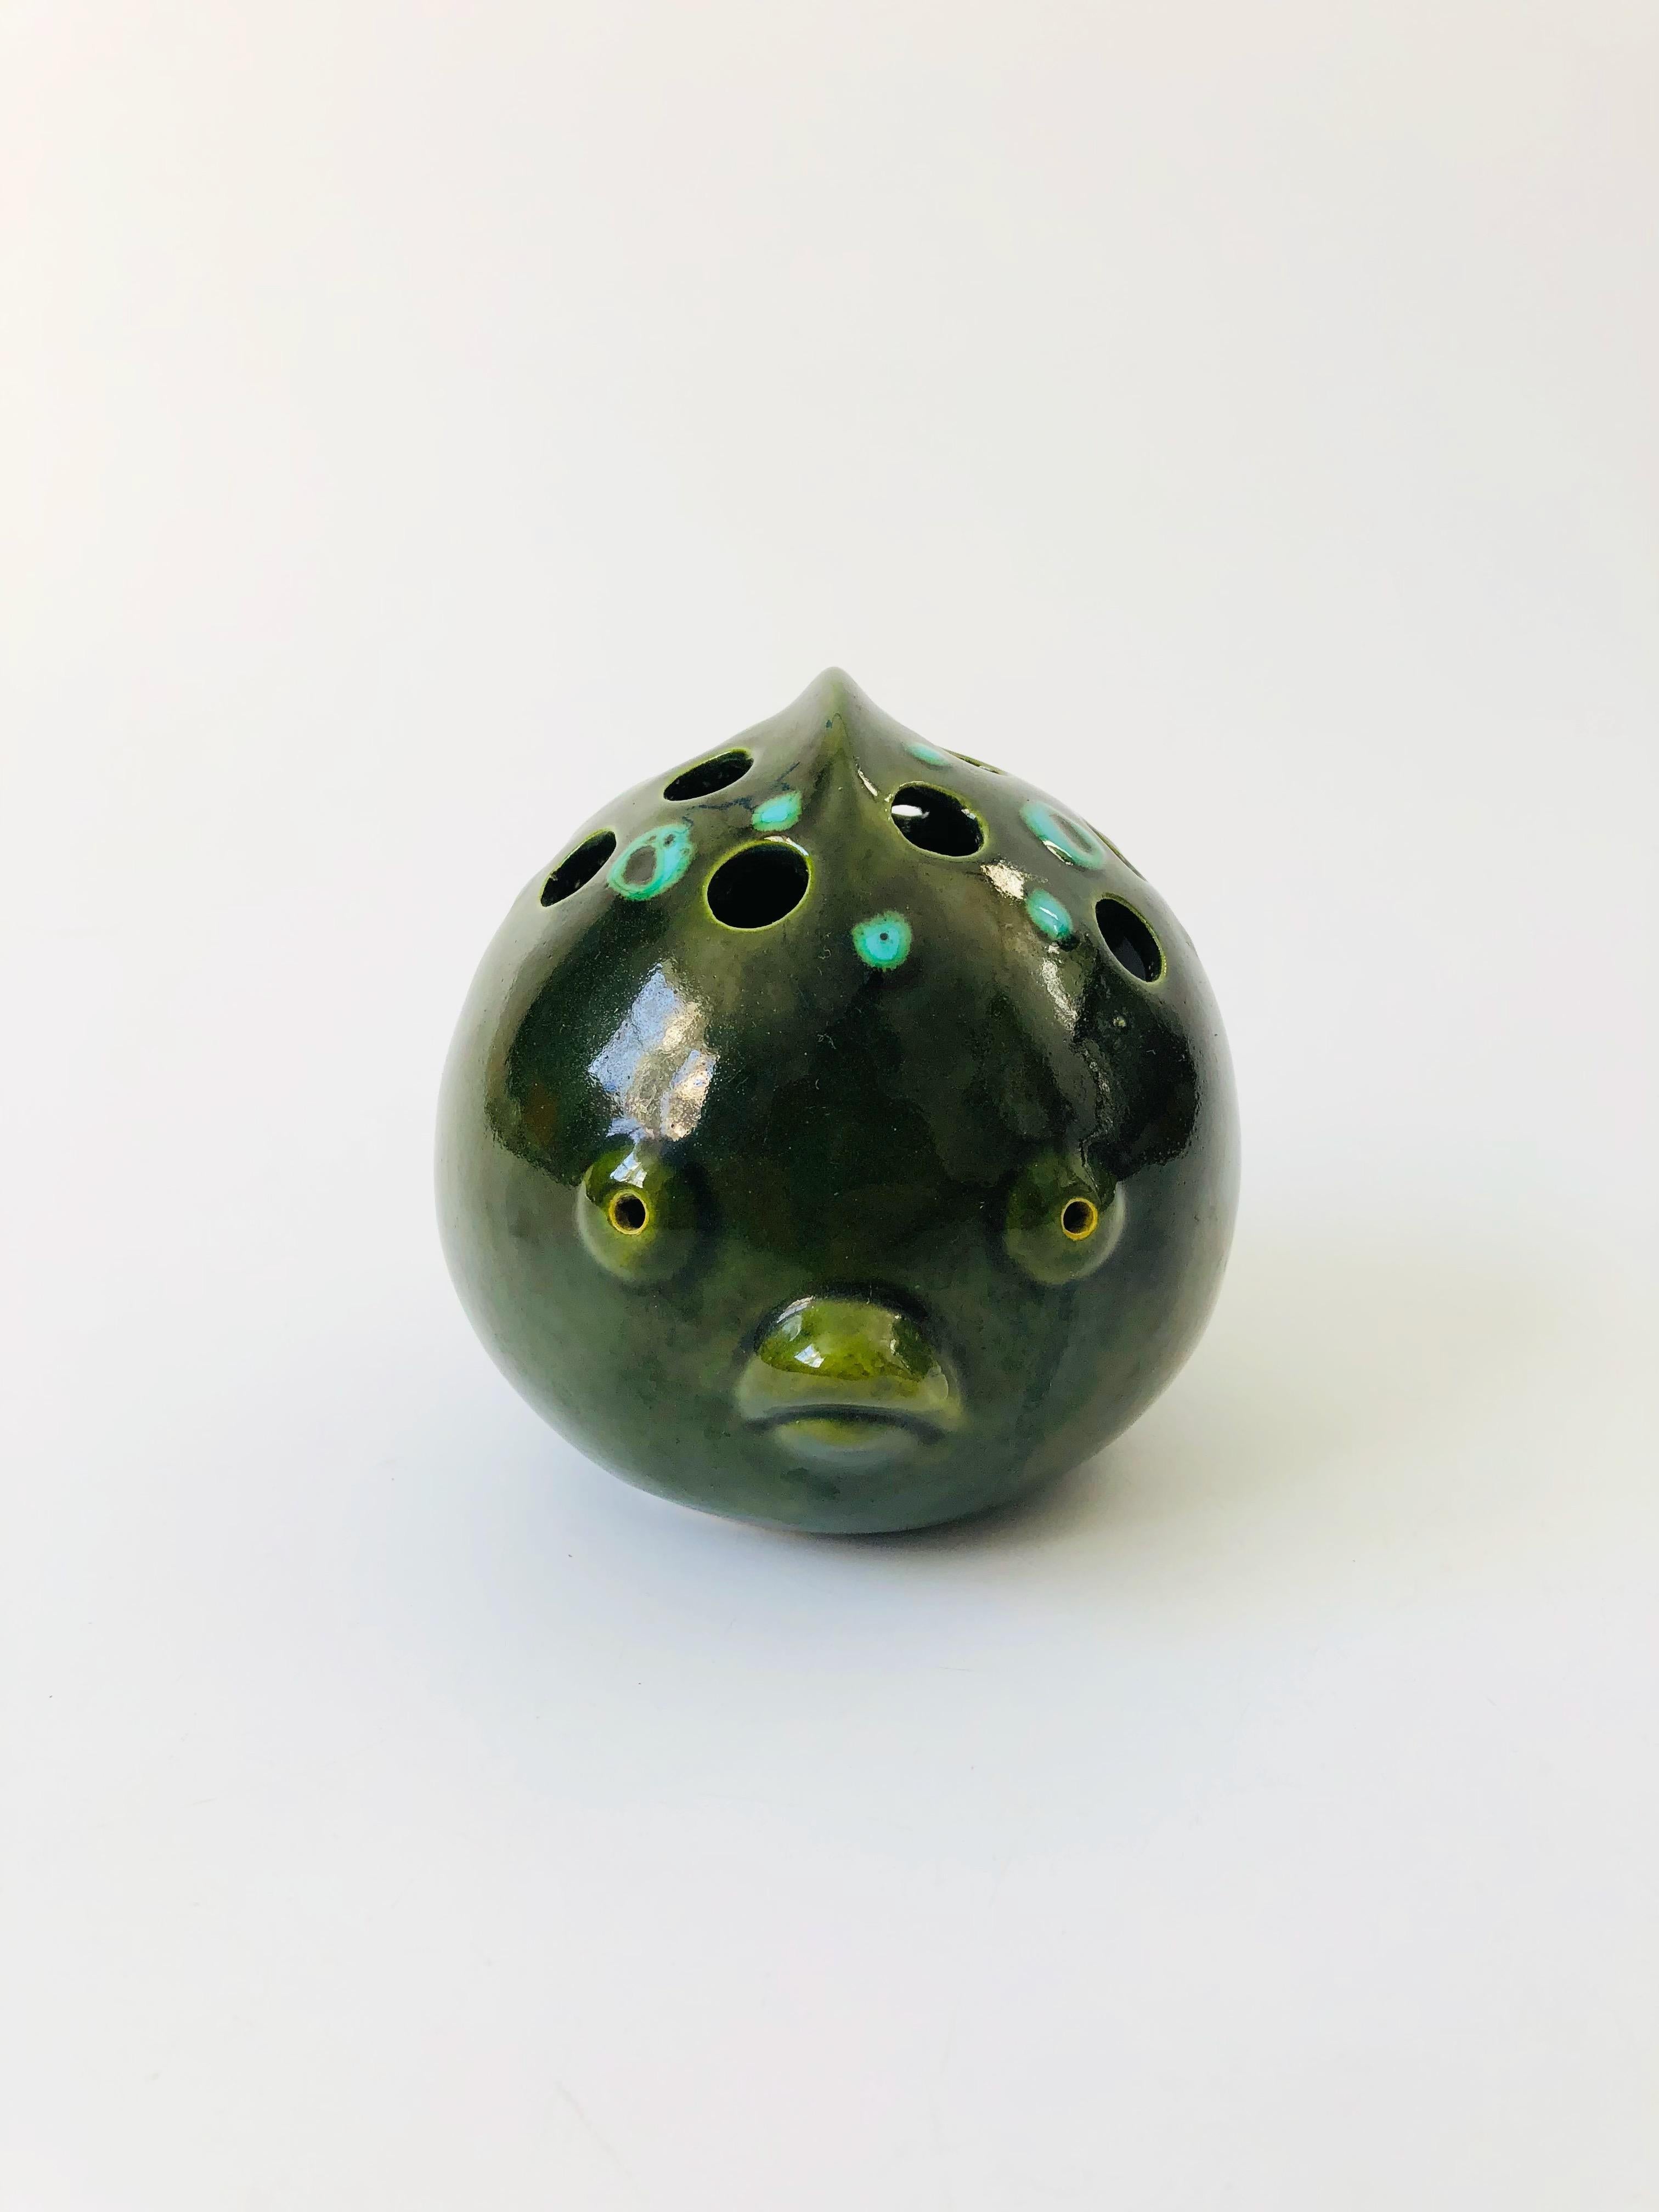 A mid century Bitossi style Italian art pottery vase in the shape of puffer fish. Several holes on the top can be used for floral arrangements. Great stylized detailing and form to the fish with beautiful green and blue glazes. Marked on the bottom